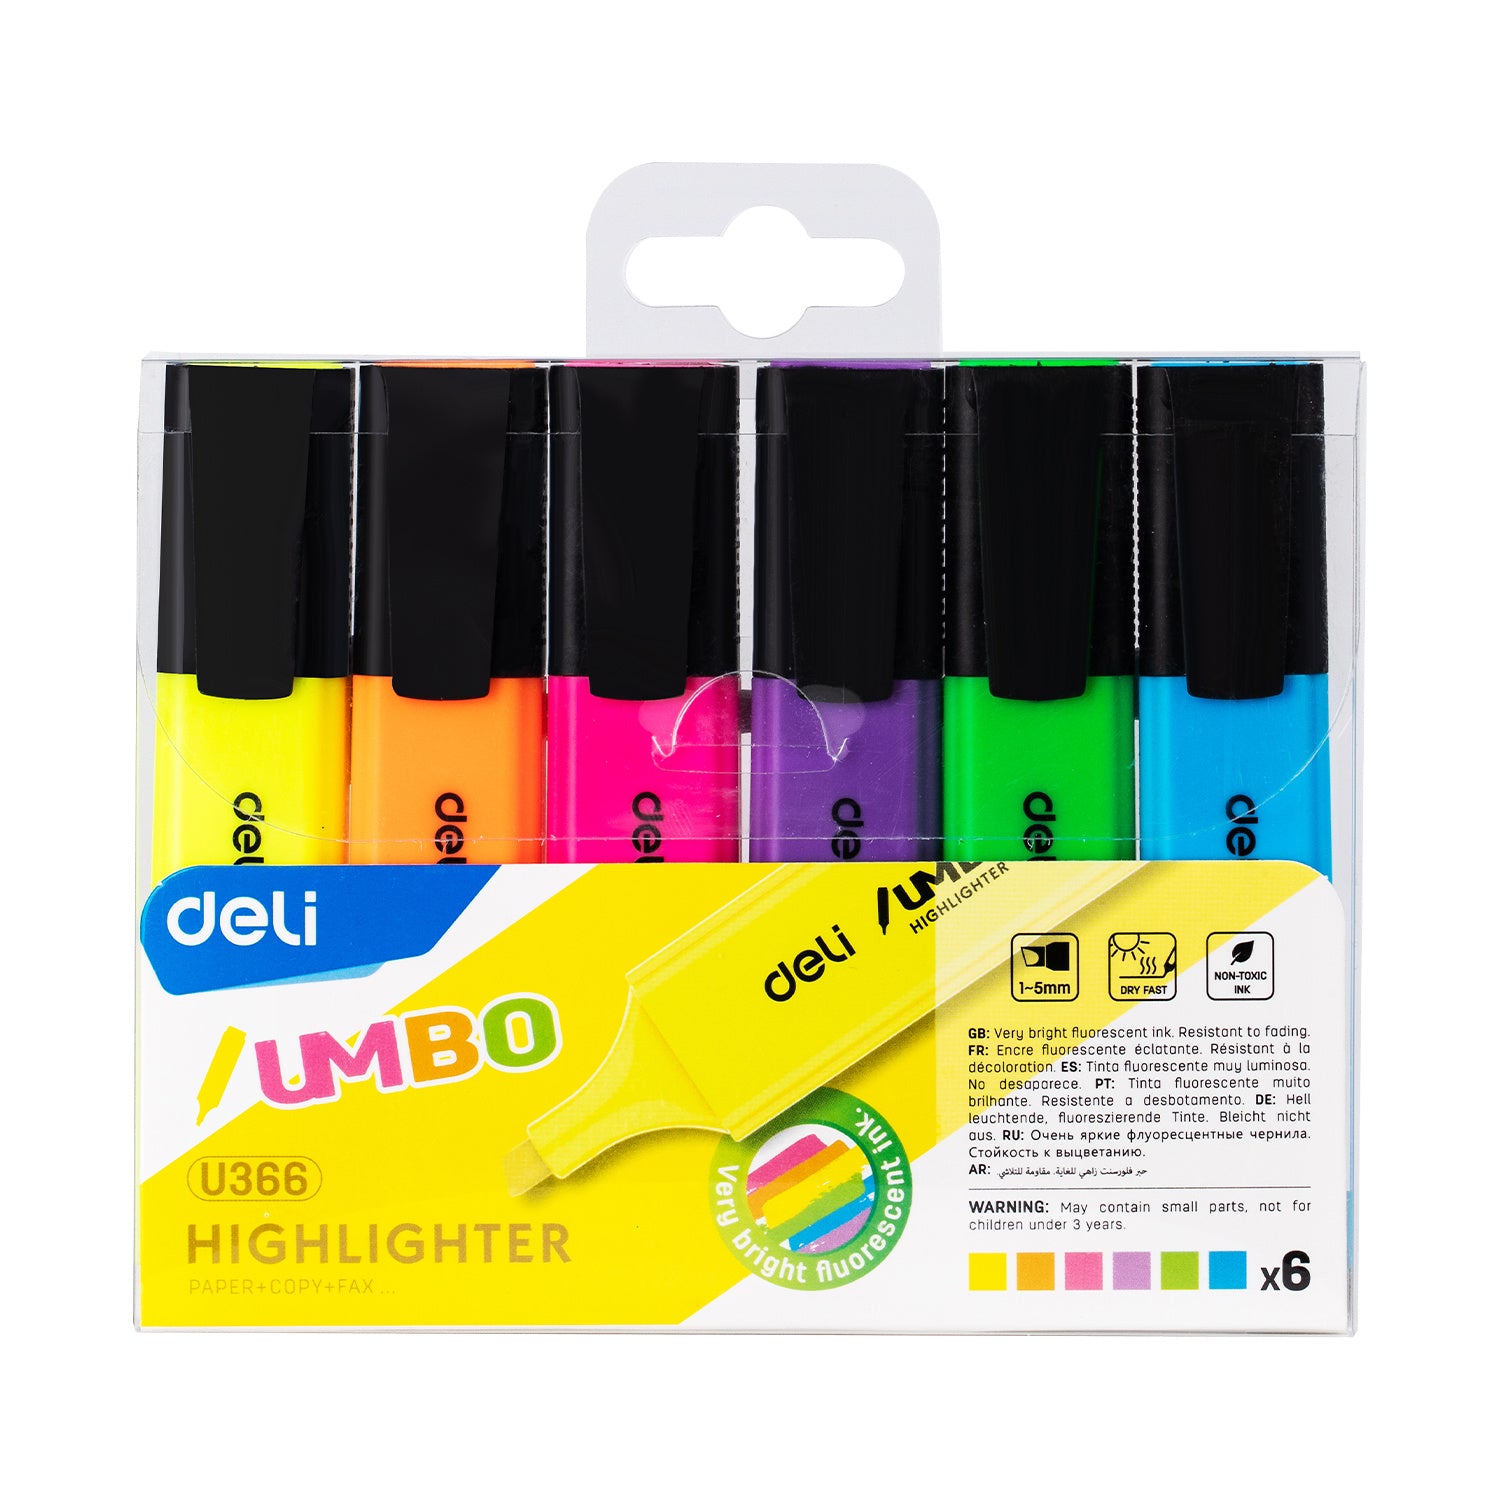 Details: Packaging of six Deli Highlighters Pastel Markers in assorted colors (black, blue, green, yellow, orange, pink), neatly organized in a plastic case.